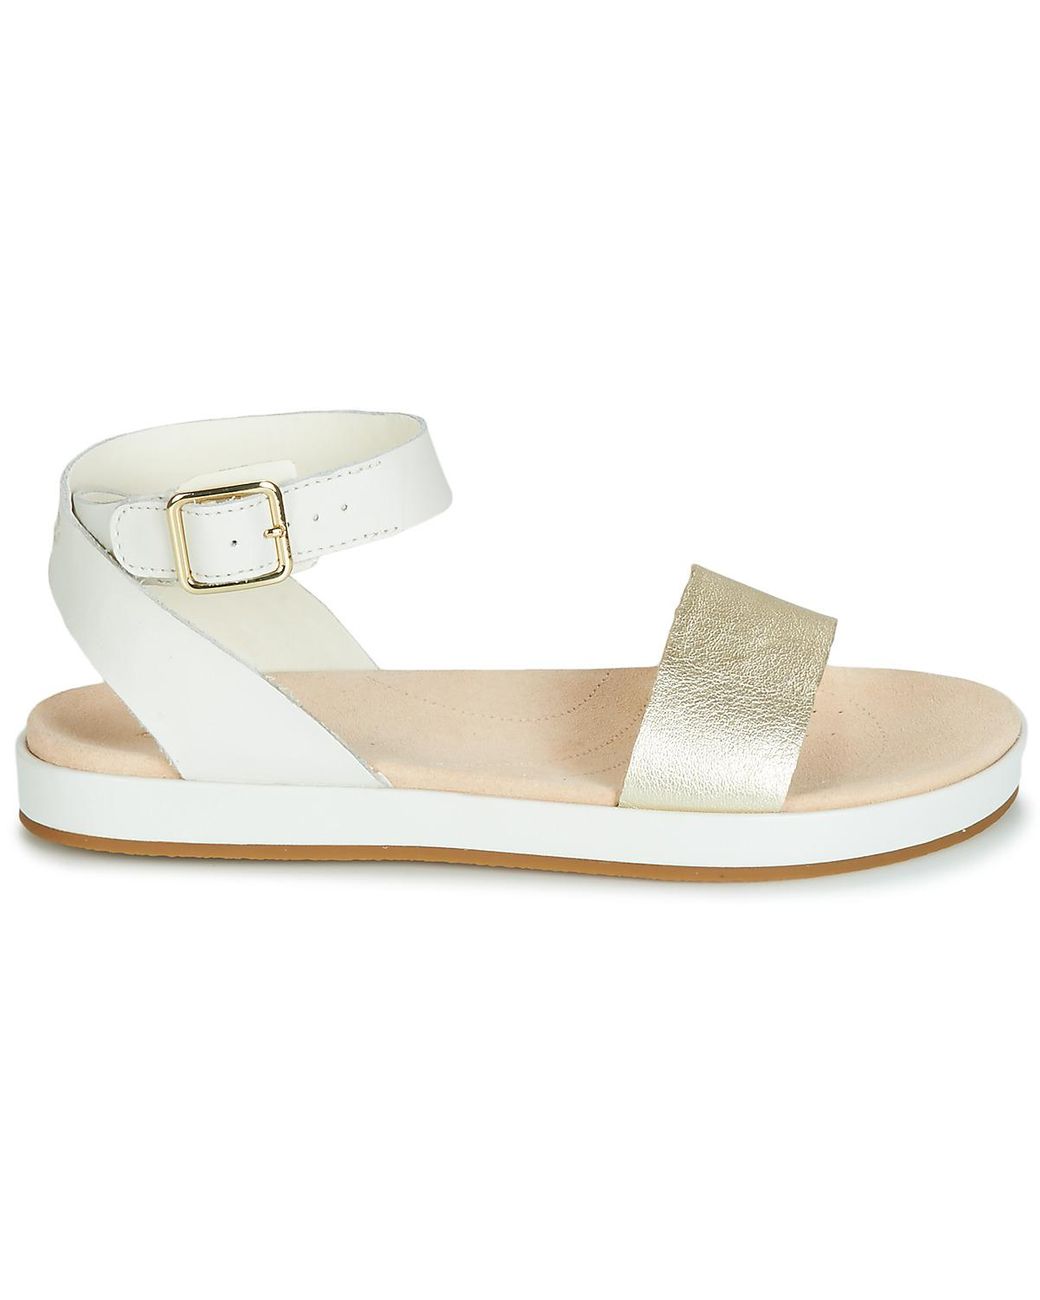 Clarks Leather Botanic Ivy Sandals in White - Save 39% | Lyst UK